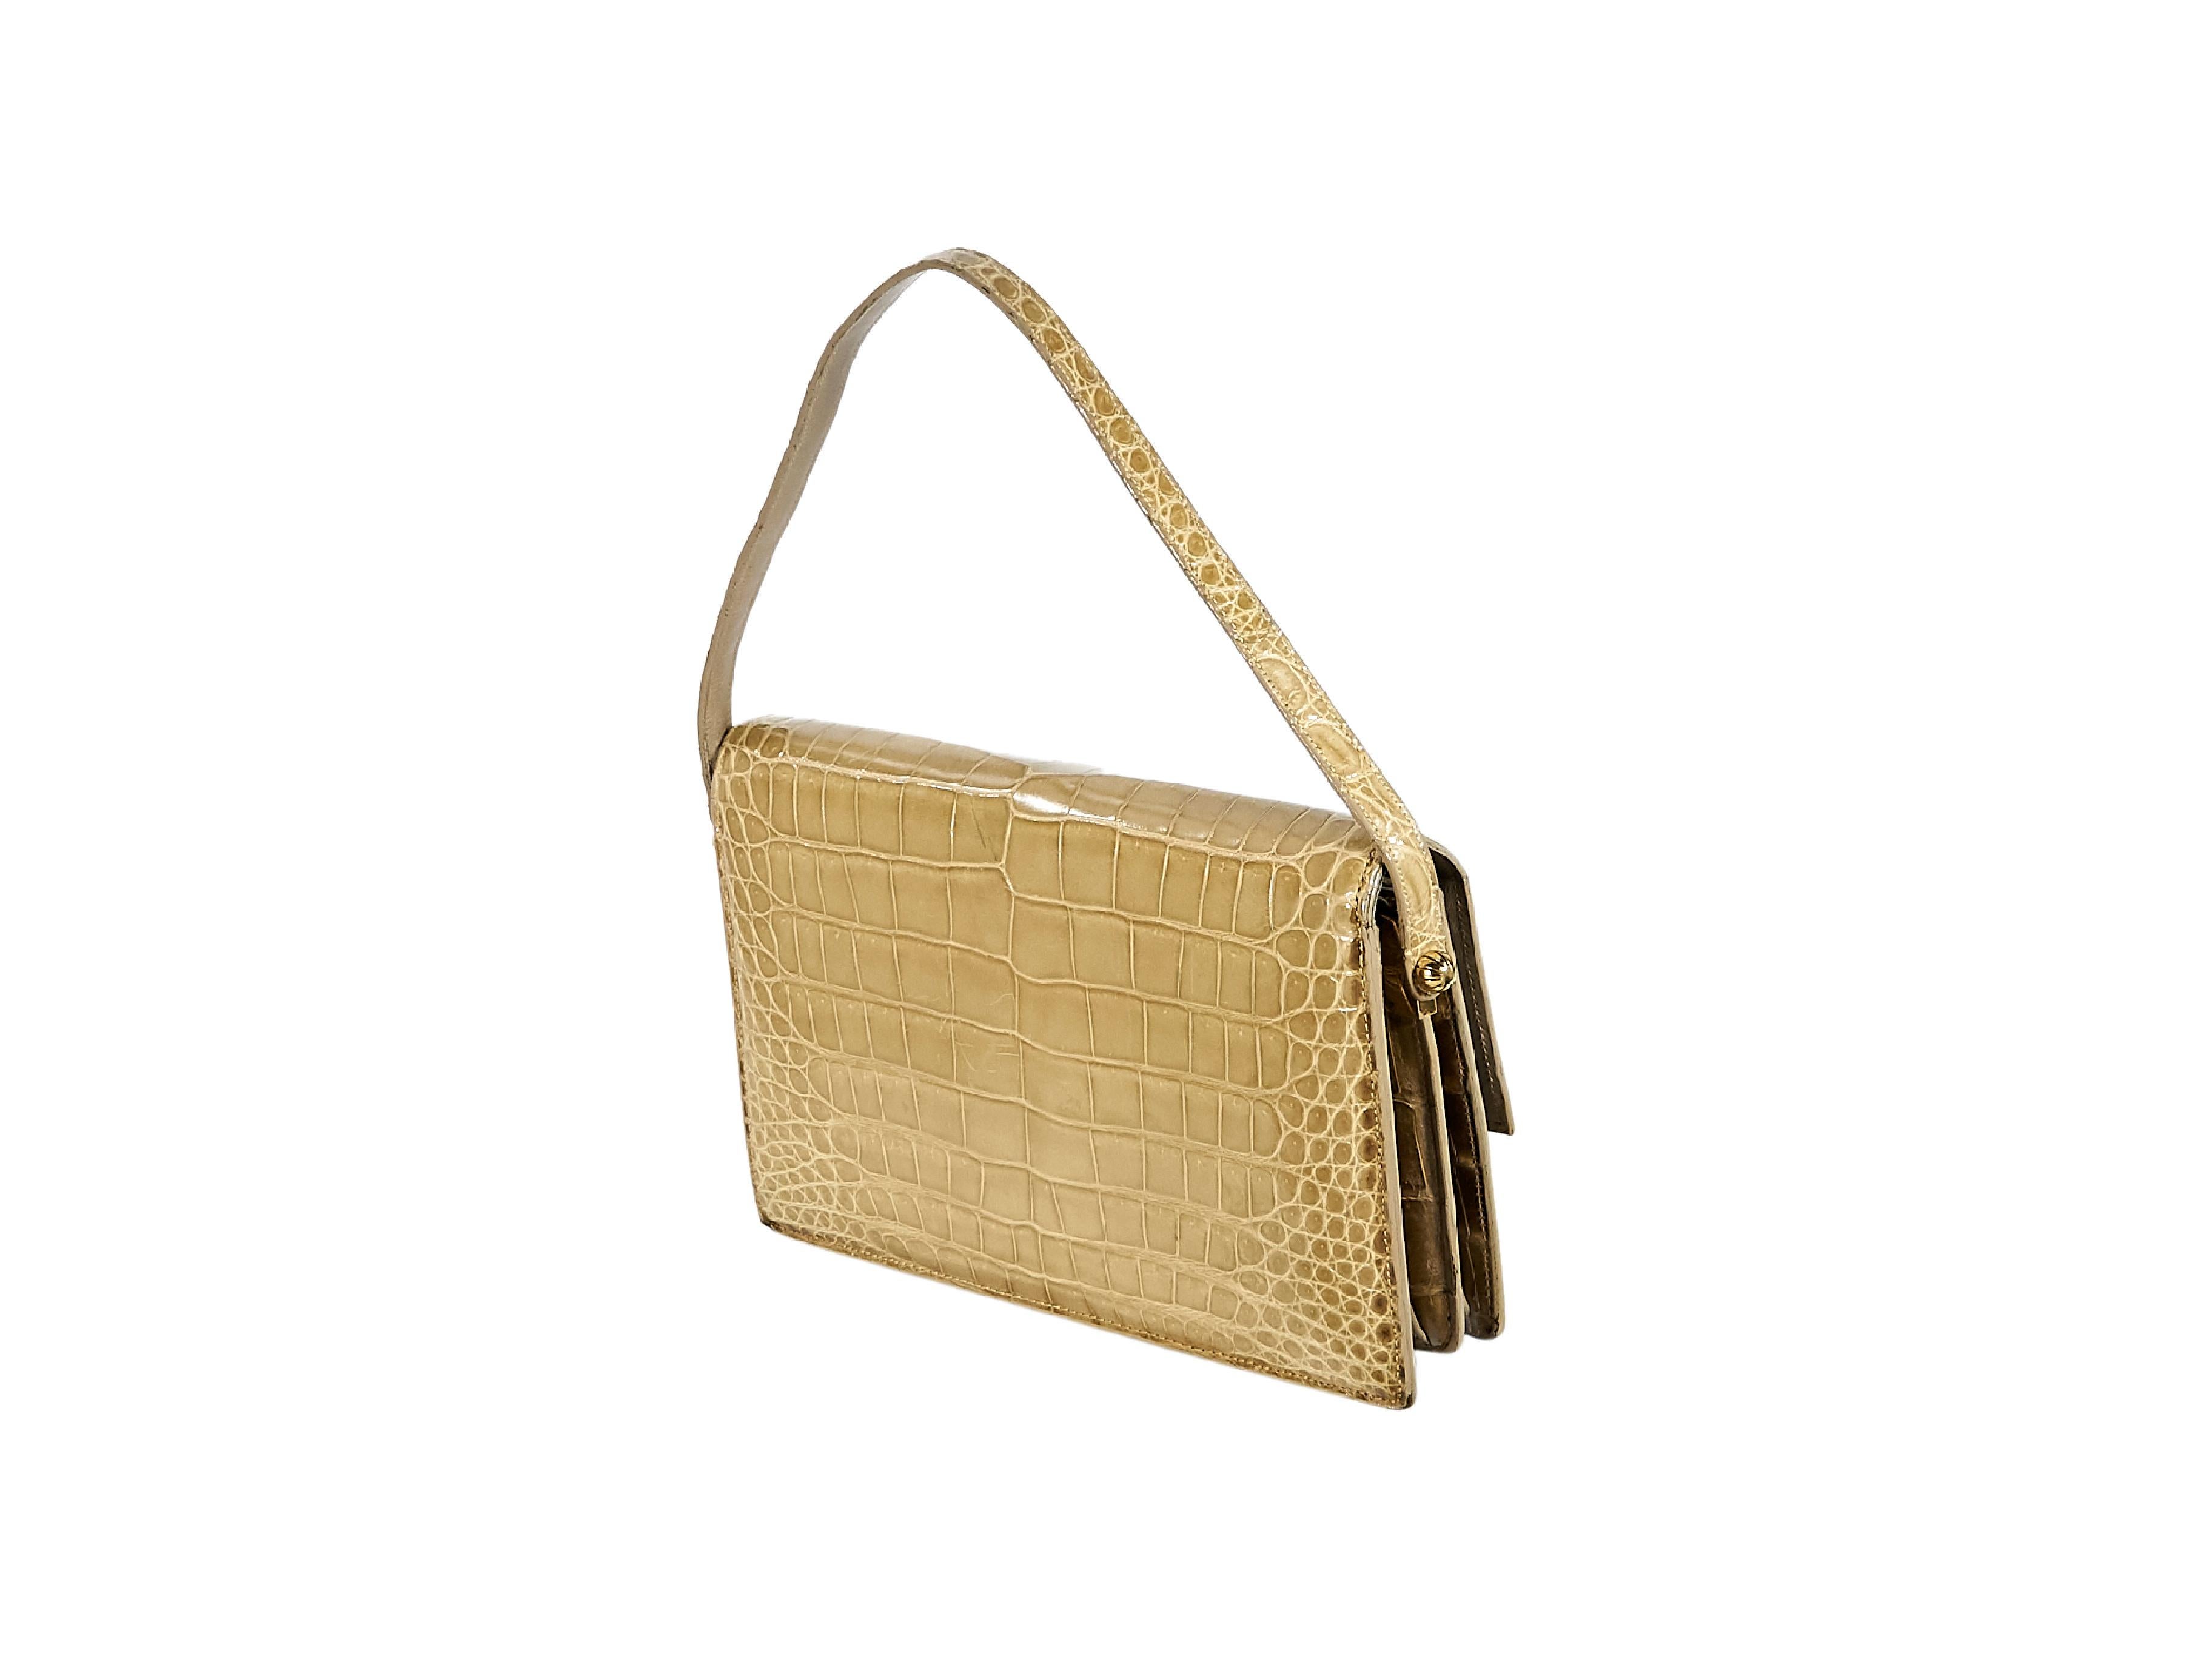 Product details:  Vintage tan alligator belly shoulder bag by Lucille de Paris.  From the 1950s/1960s.  Single shoulder strap.  Front flap with flip-lock closure.  Lined interior with center zip compartment and inner slide and zip pockets.  Goldtone